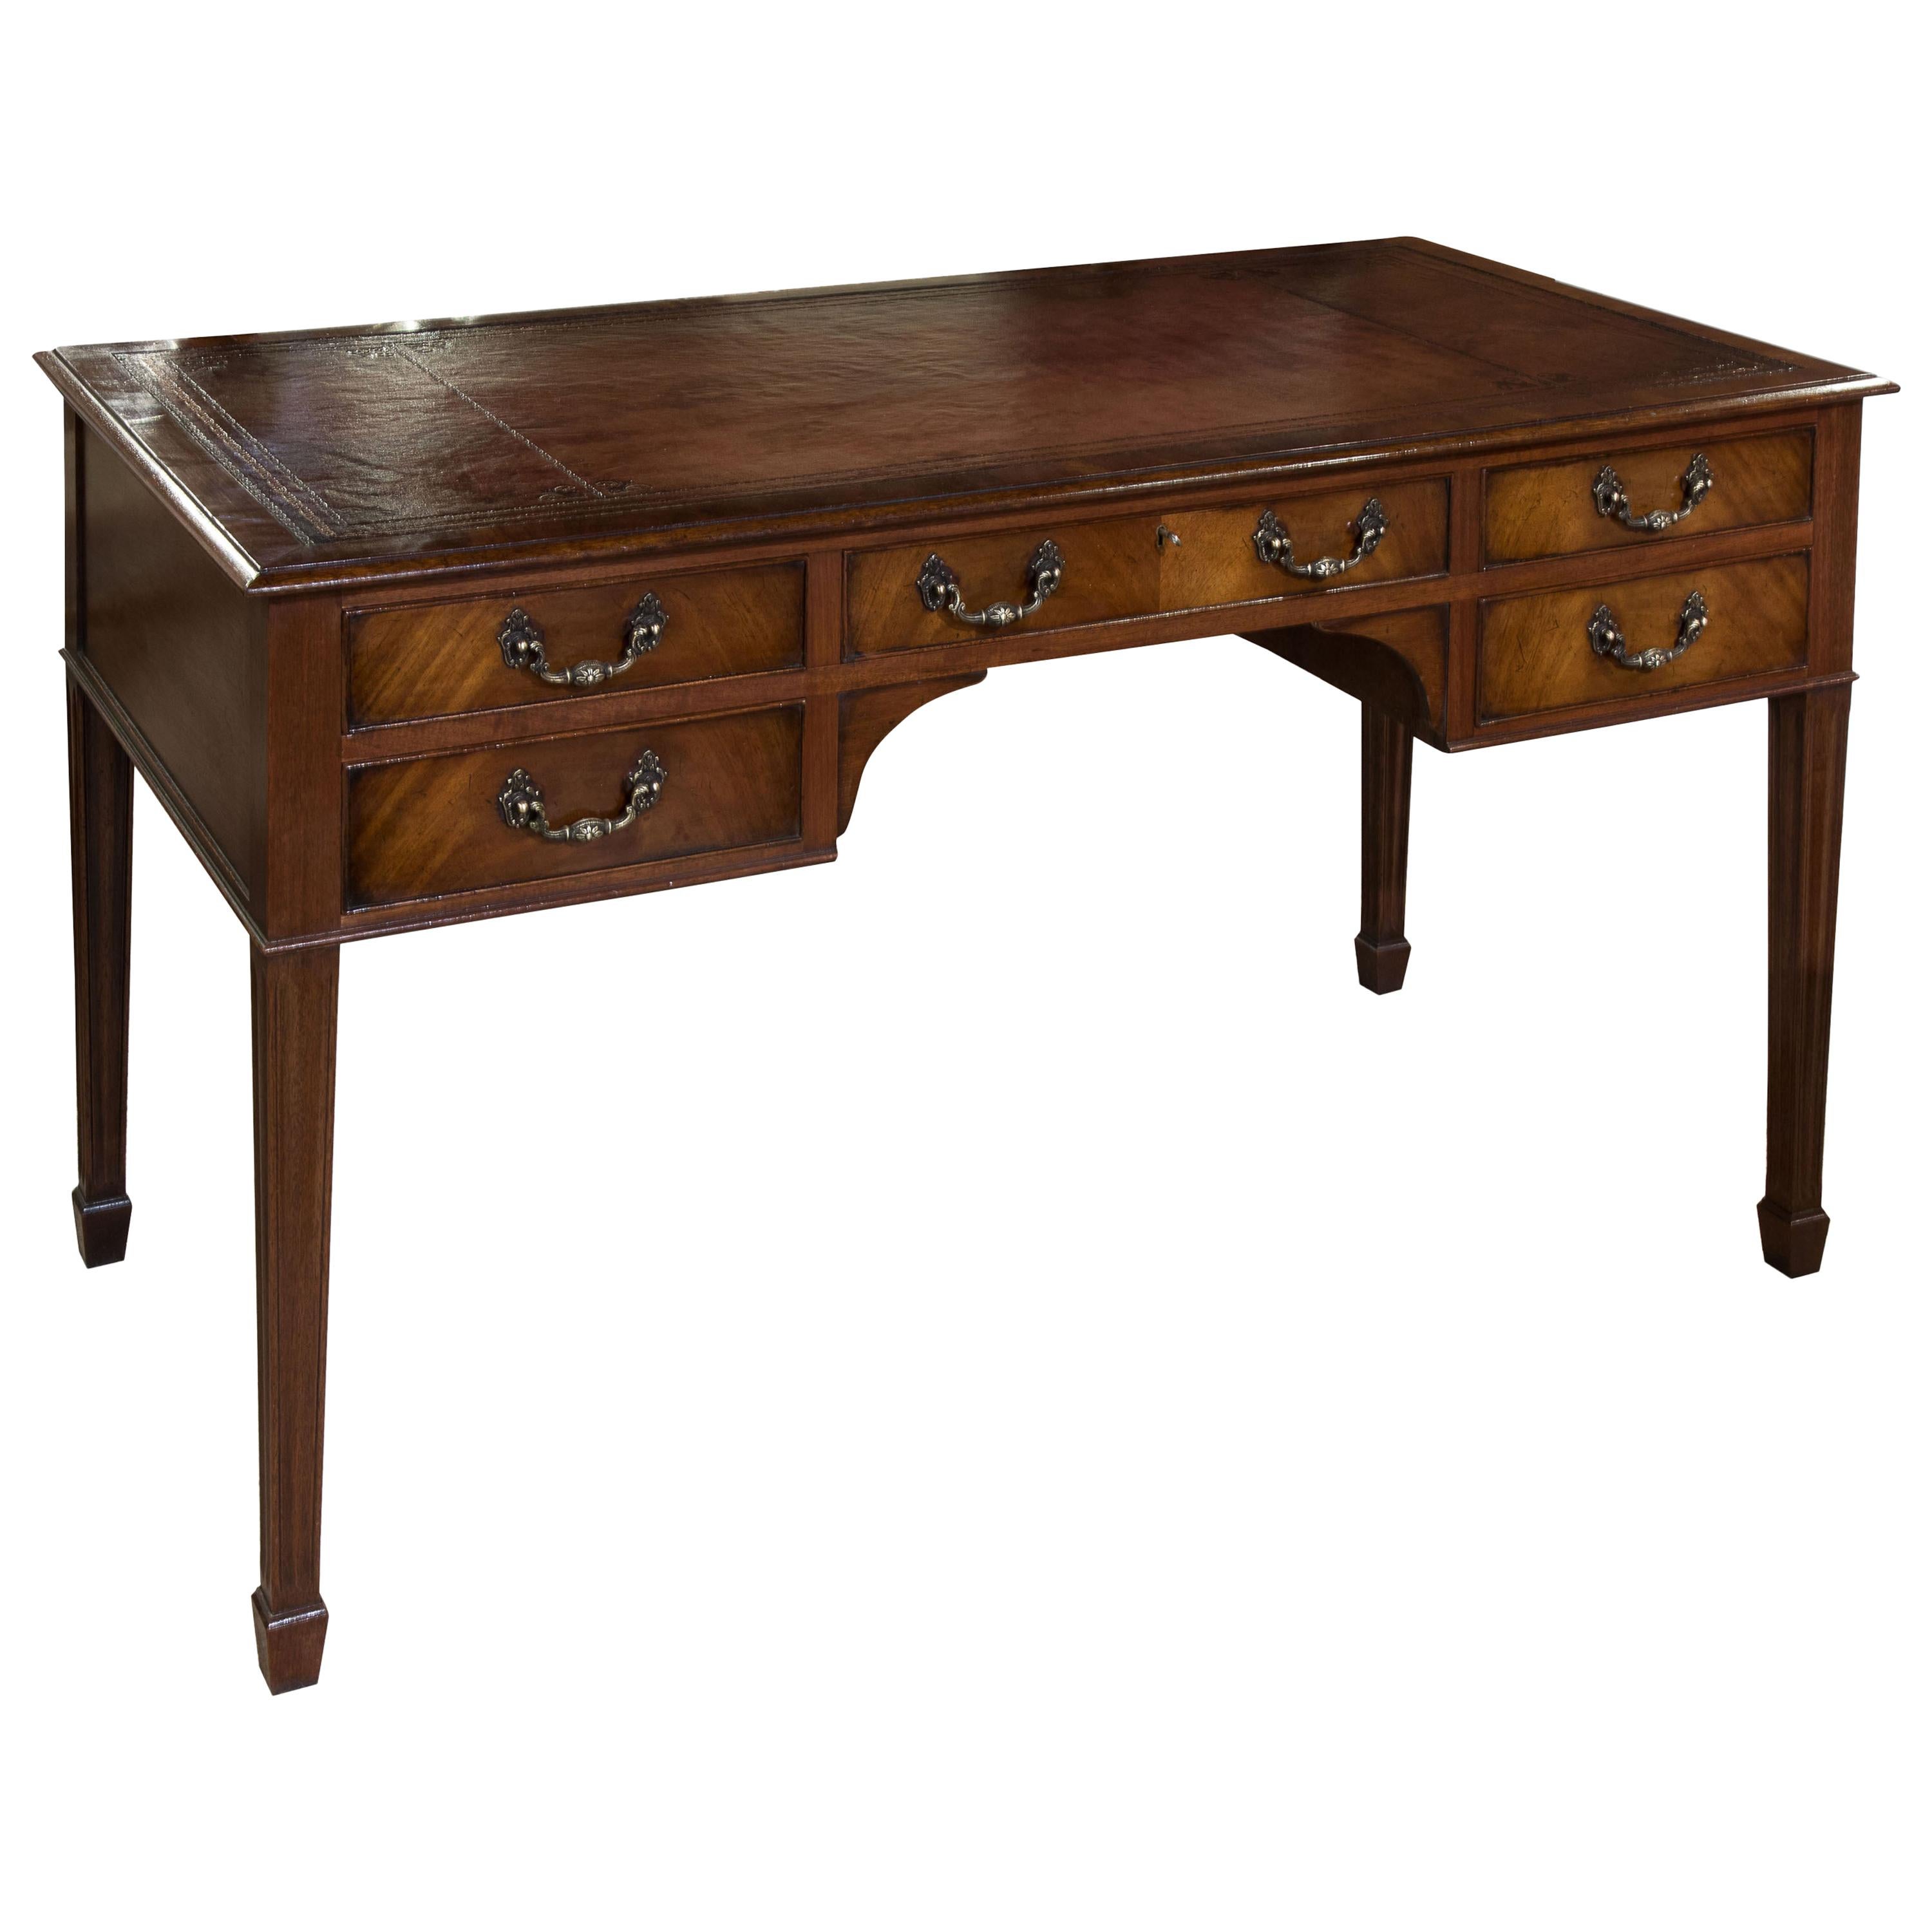 Mahogany Five-Drawer Writing Table with Antique Wine Leather Top, circa 1900